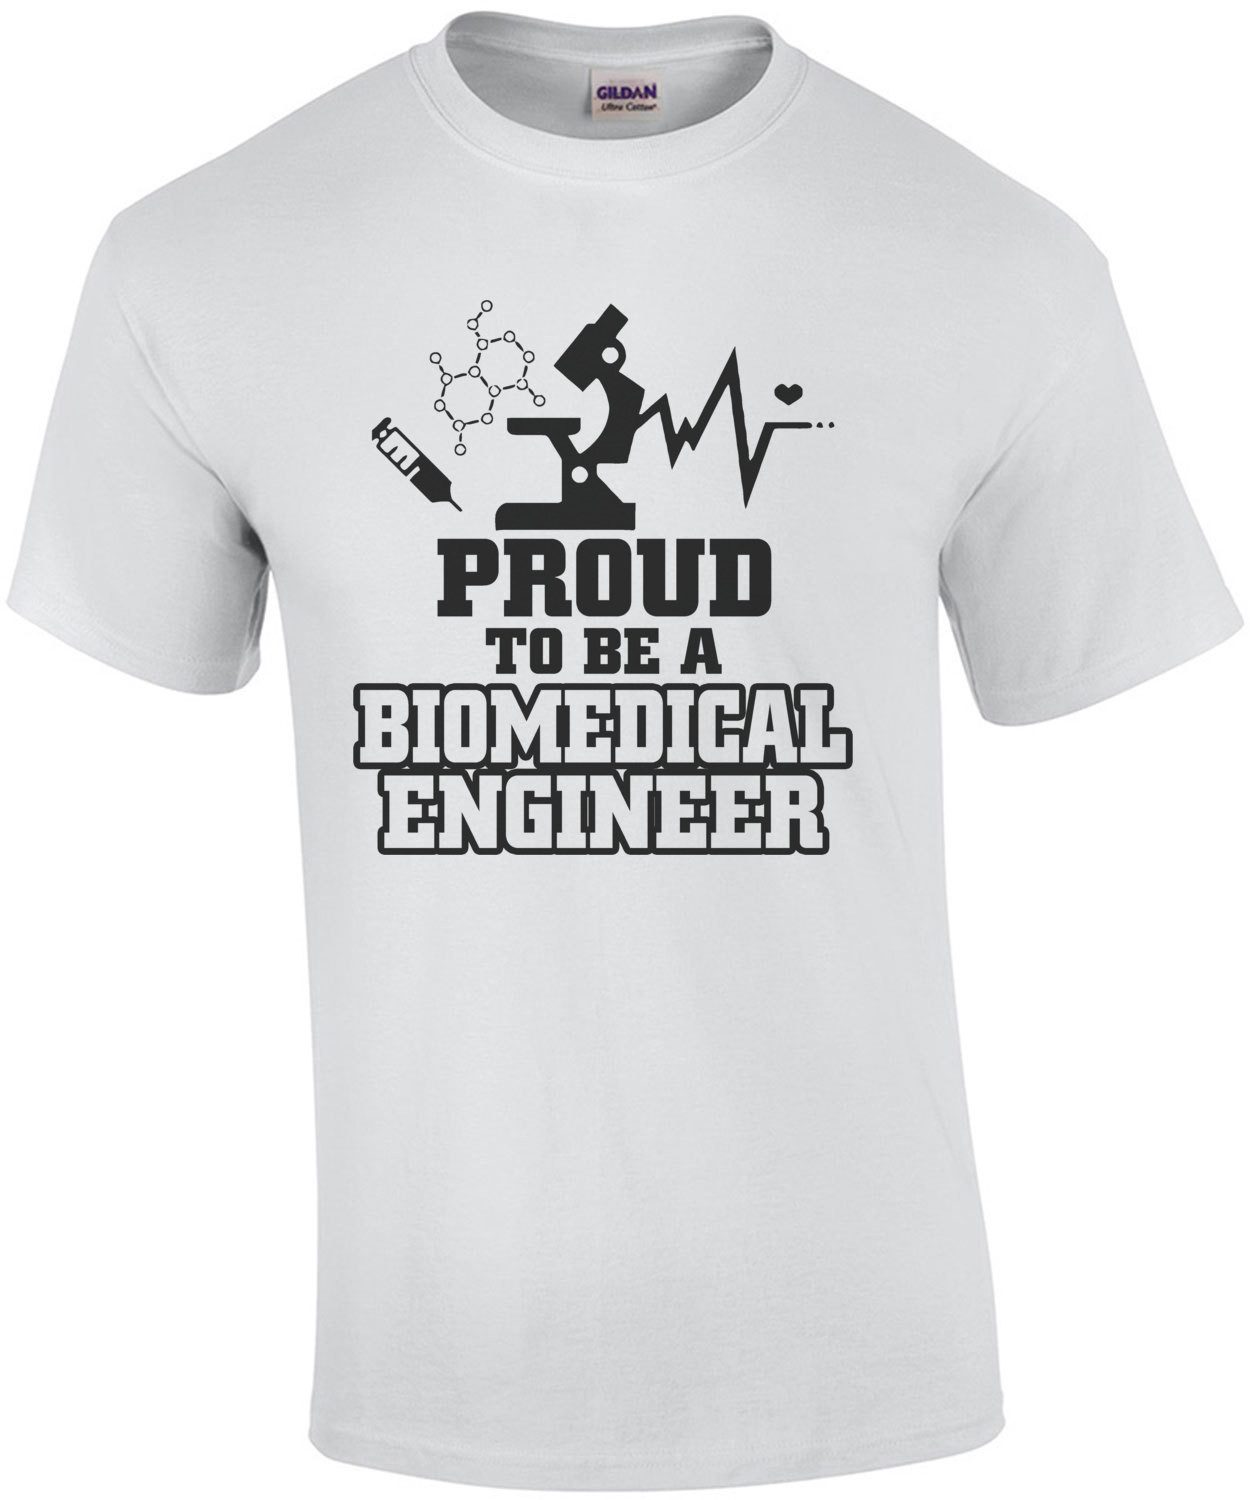 Proud To Be A Biomedical Engineer T-Shirt